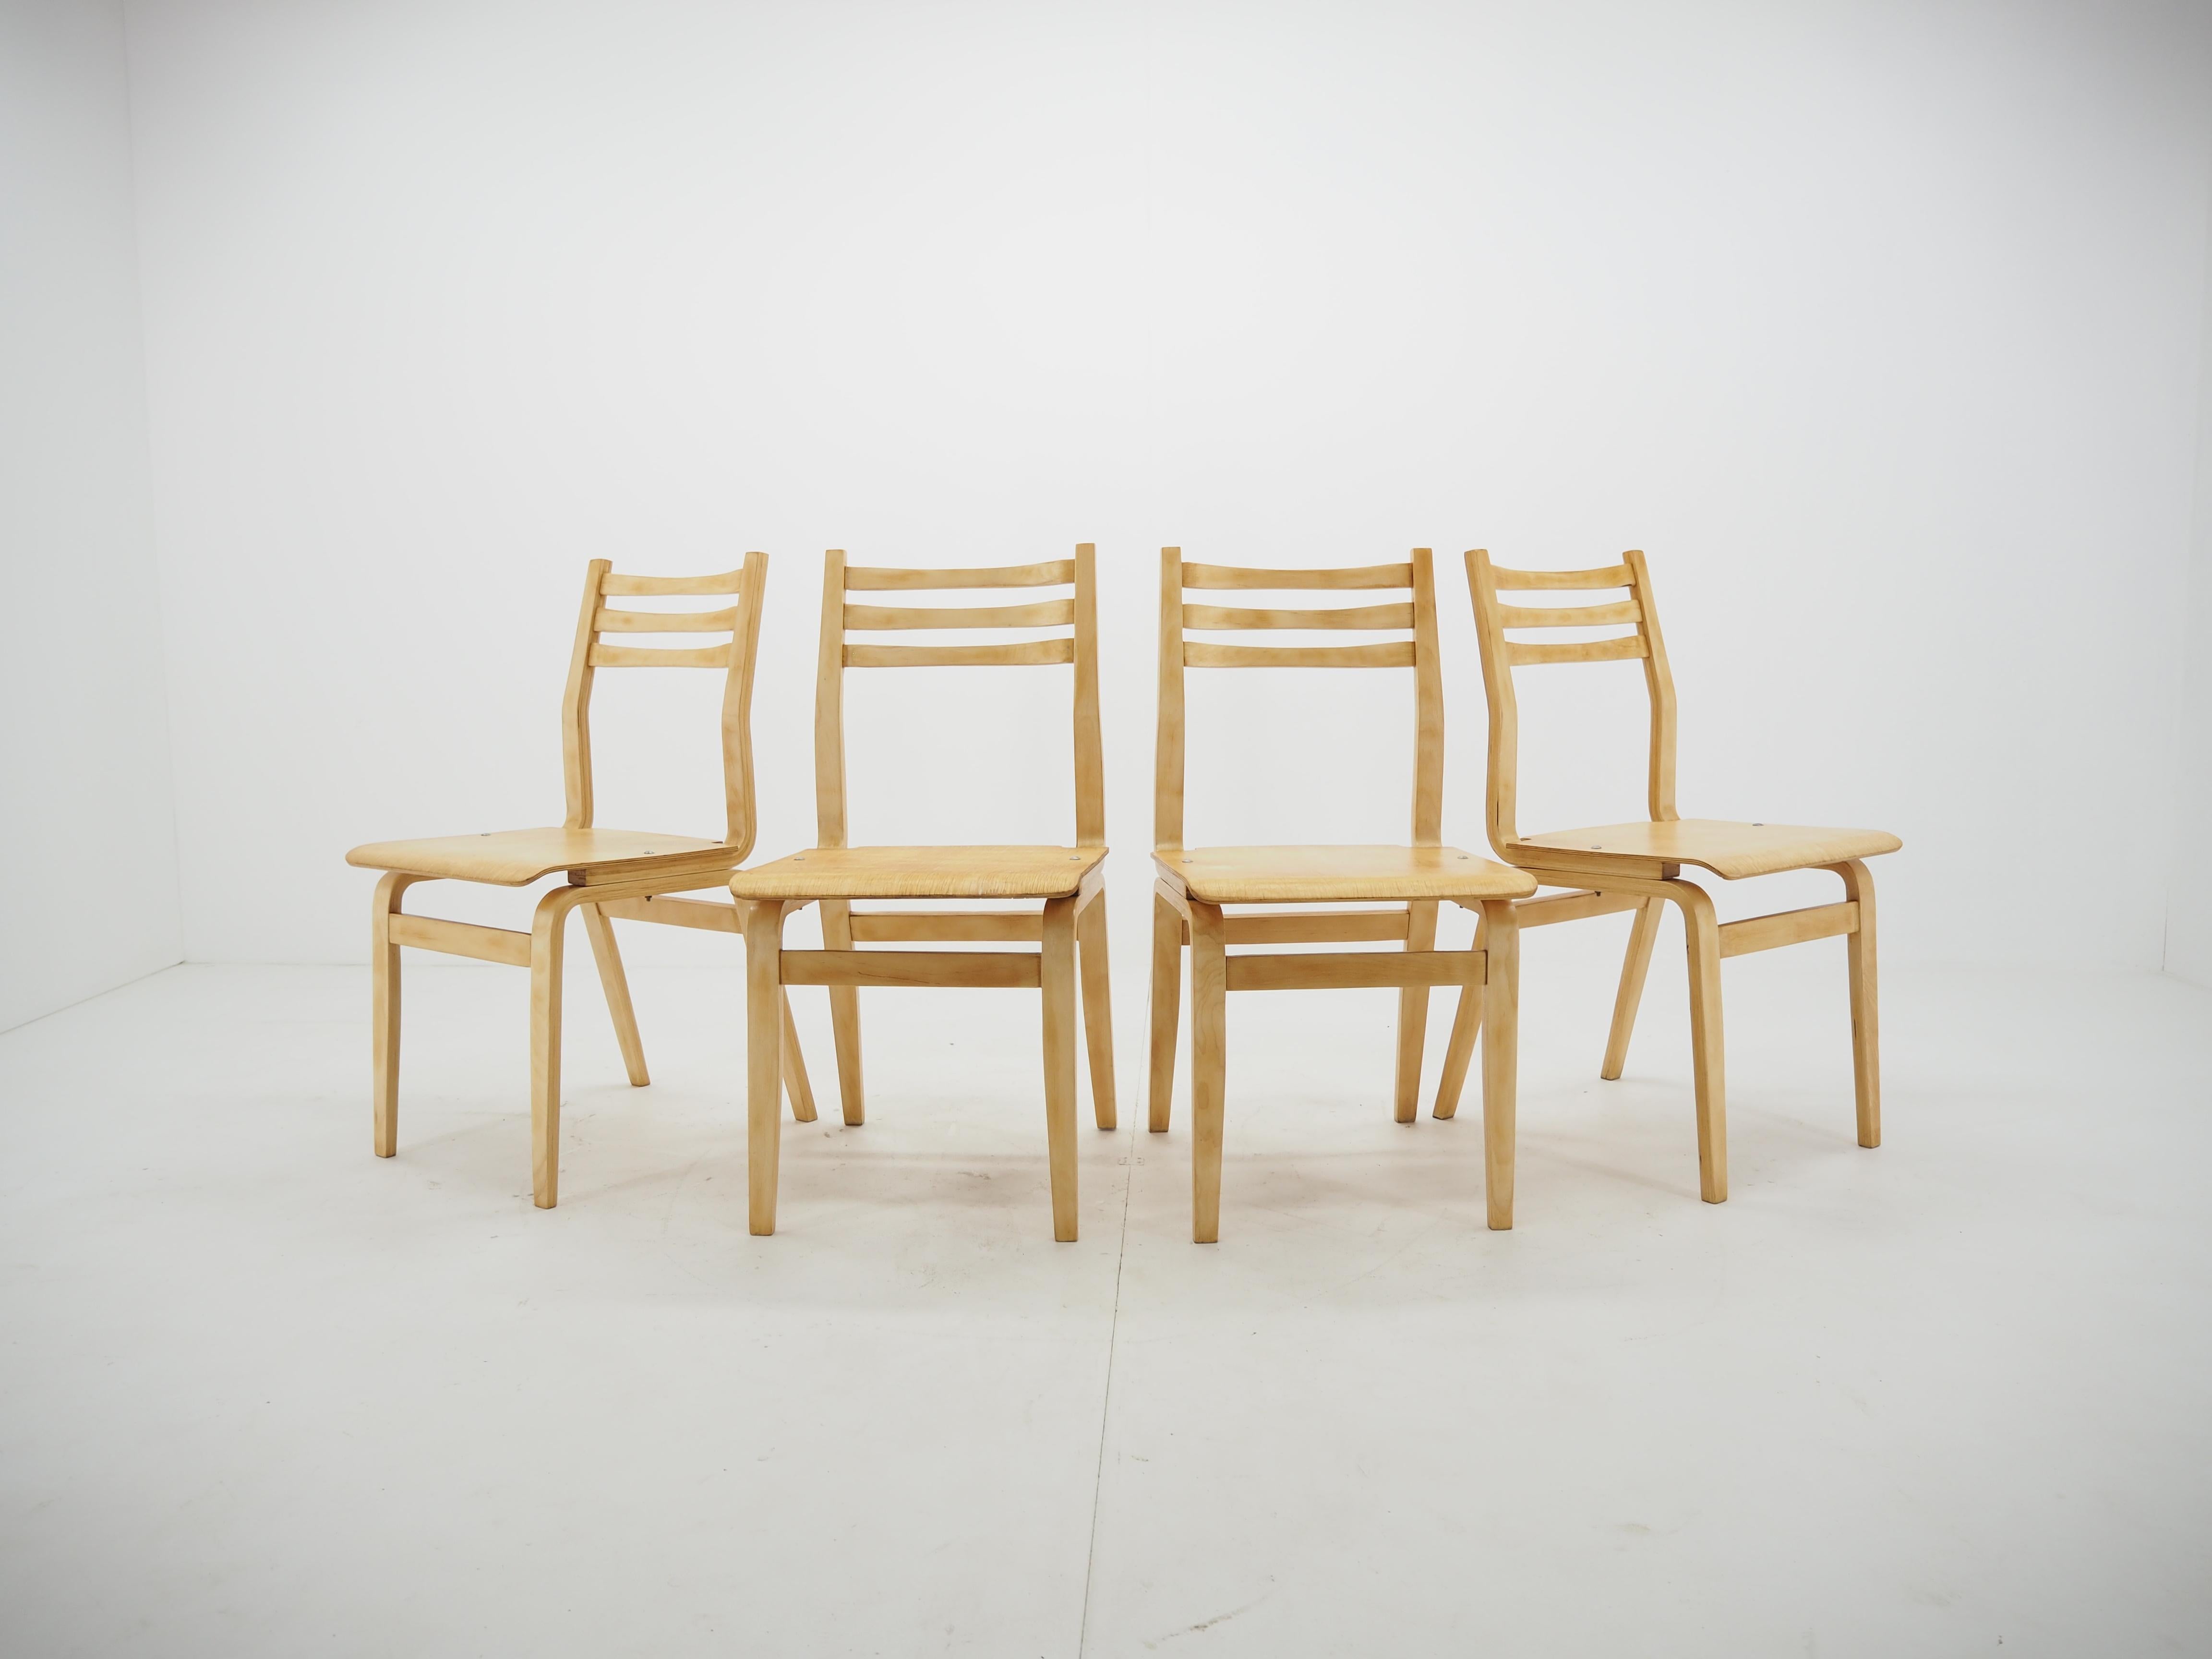 Midcentury Set of 4 Wood Dining Room Chairs 1970s 4